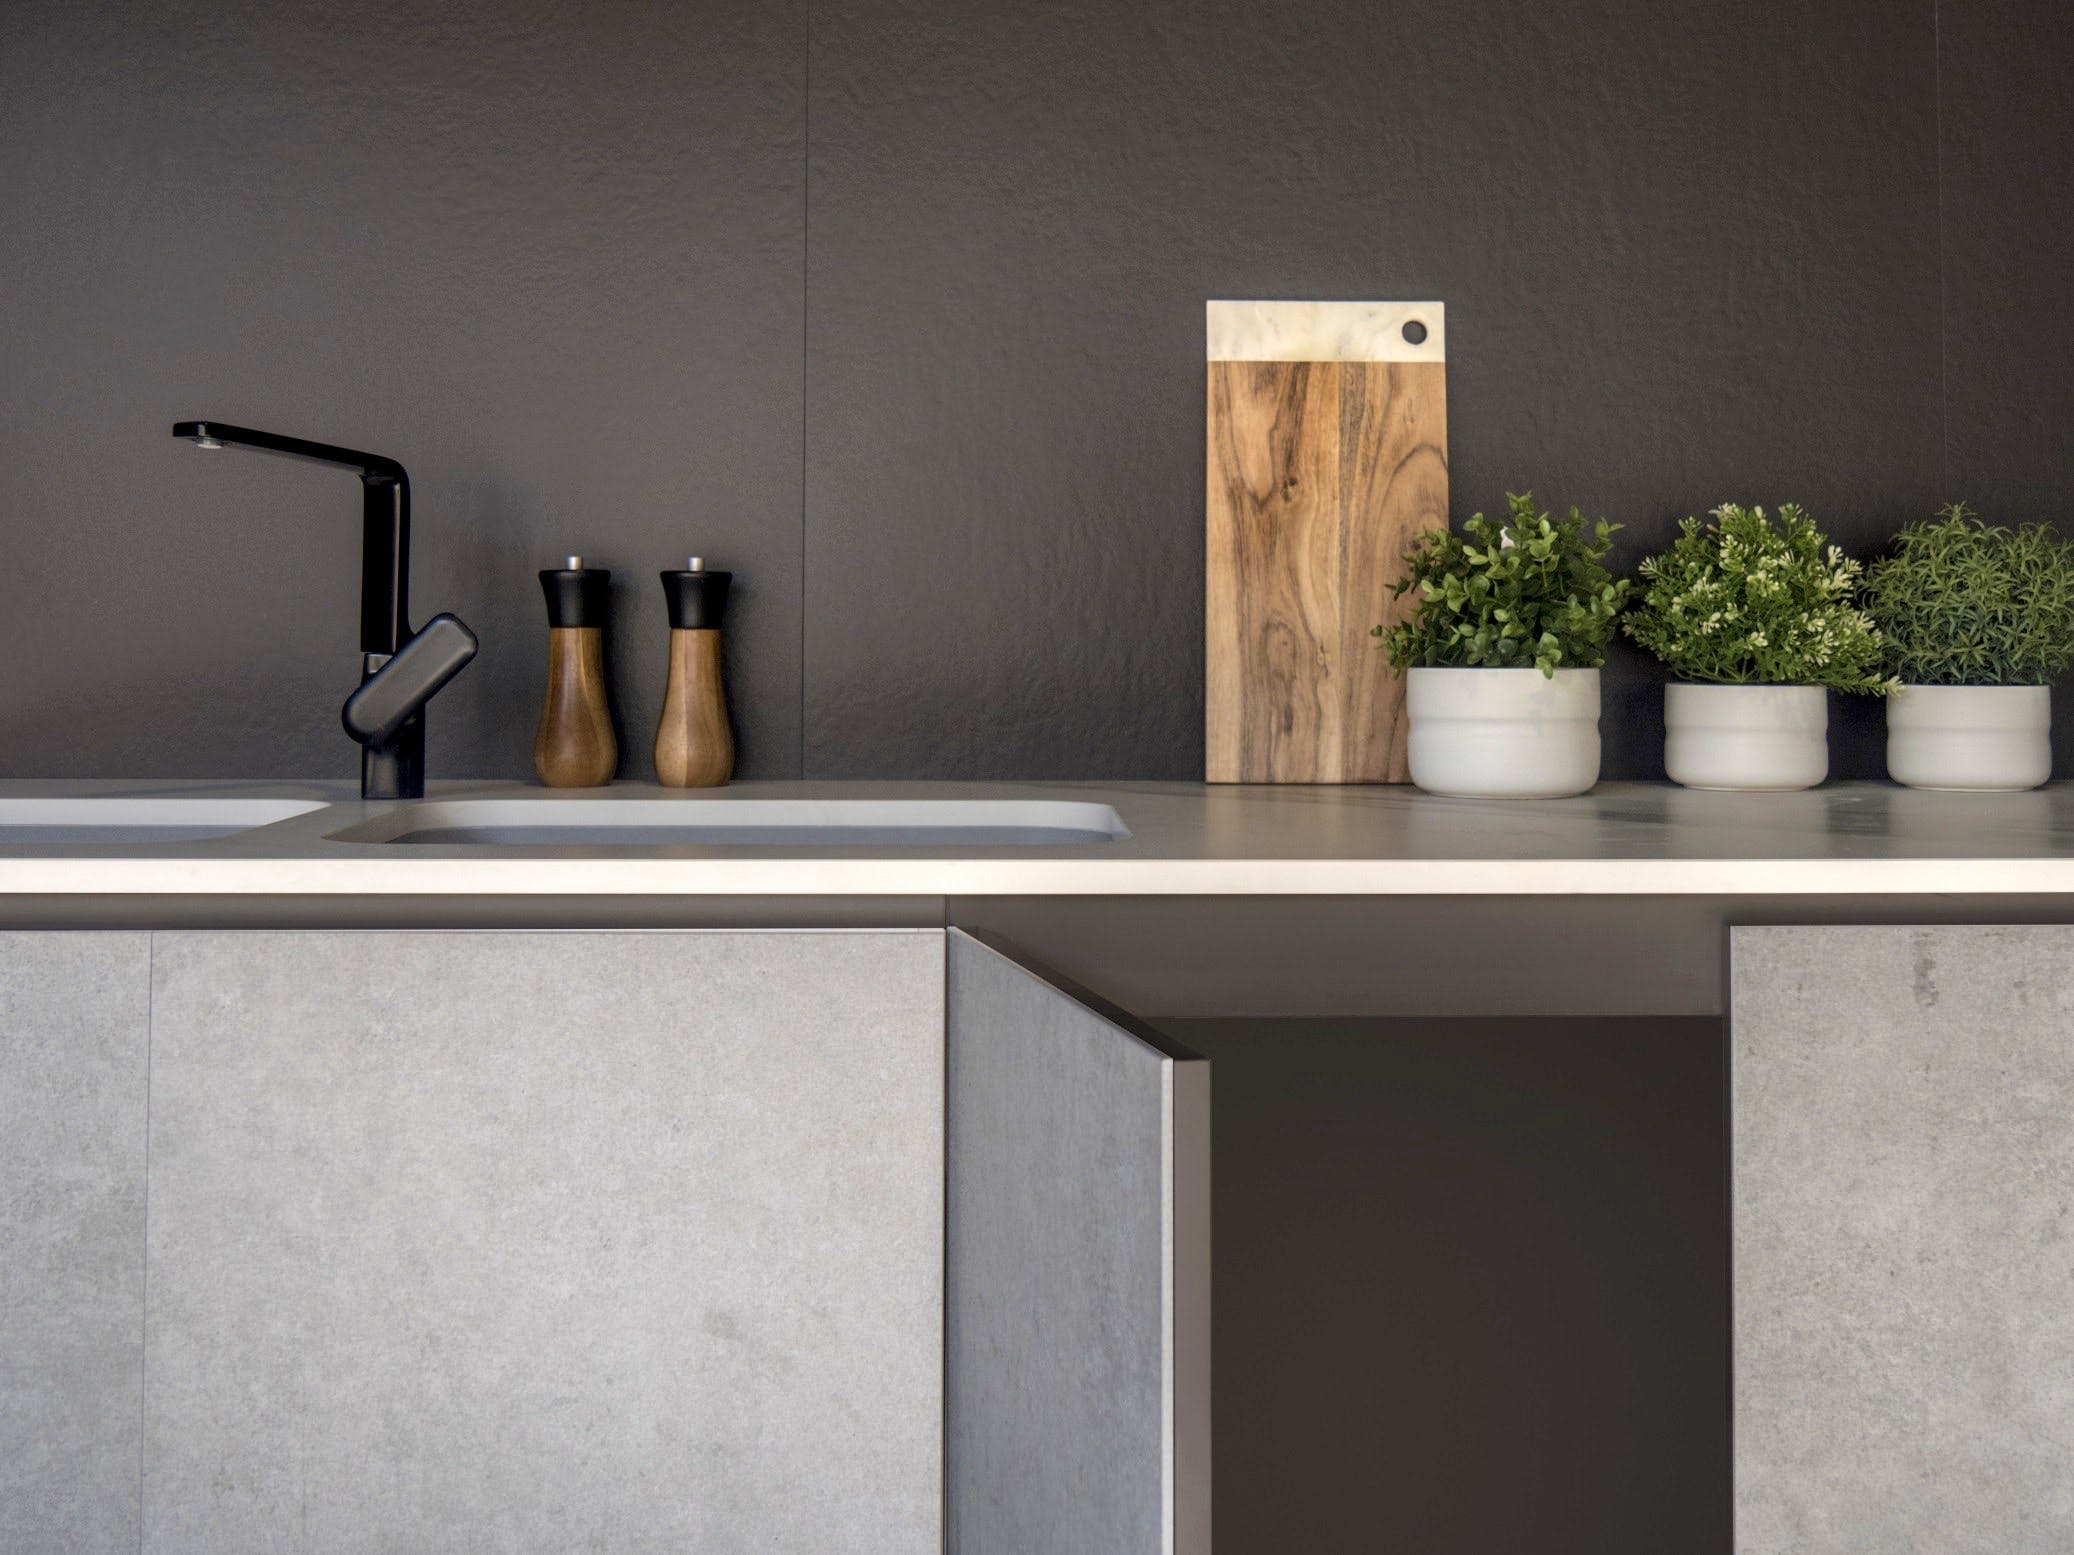 Image of Dekton Slim revestimiento mobiliario en color Kreta baja 3 in The kitchen of the future, a multifunctional, hyperconnected and health-focused space - Cosentino